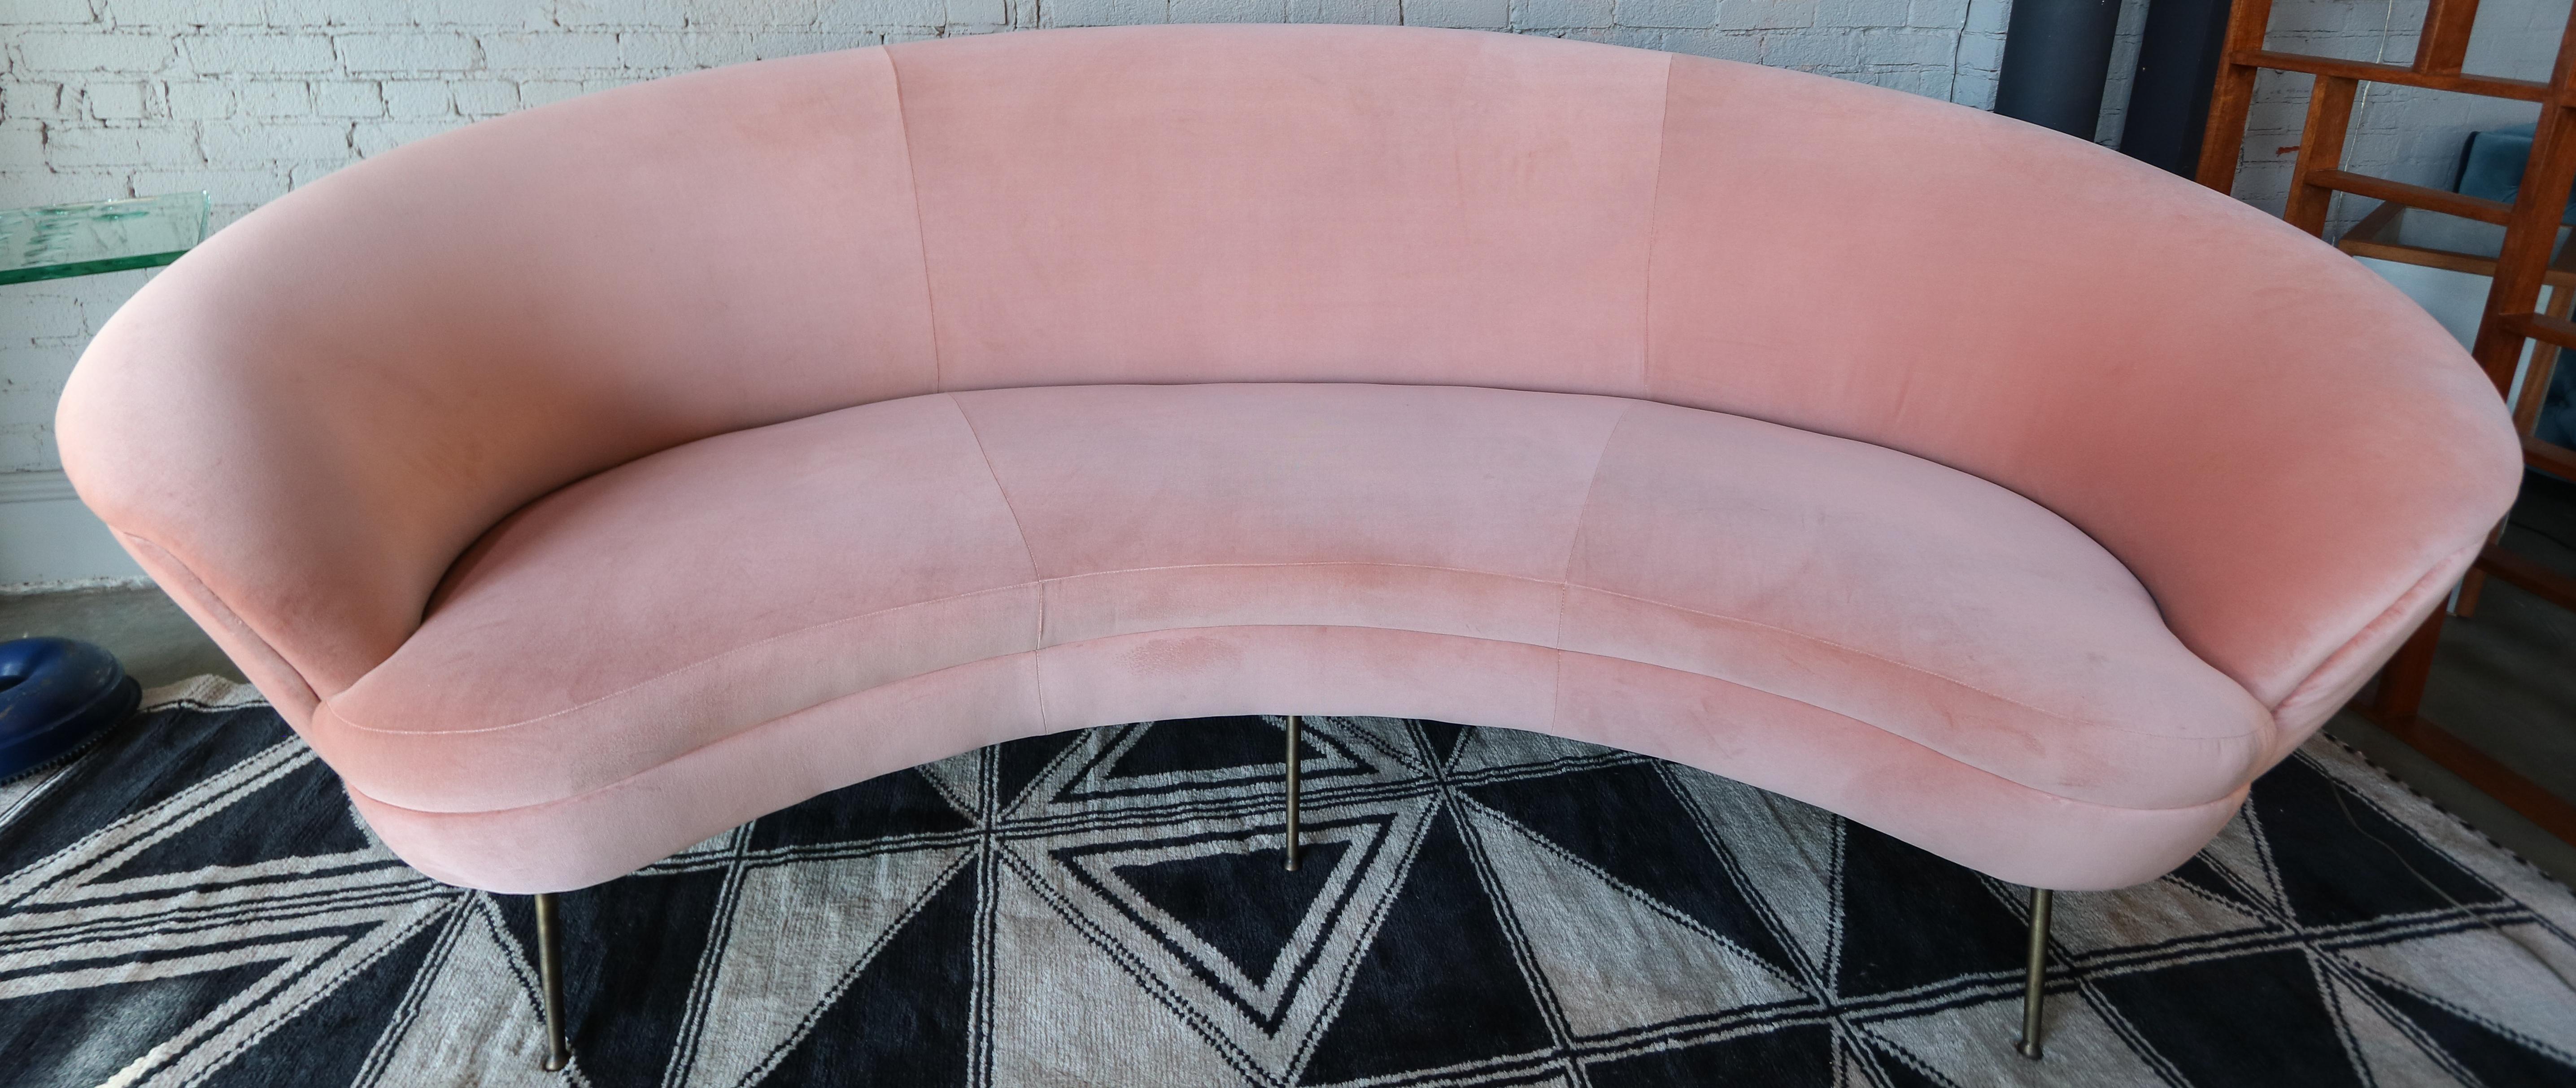 Custom curved midcentury style sofa upholstered in pink velvet with brass legs.  Made in Los Angeles by Adesso Imports.

Can be done in different sizes and colors.